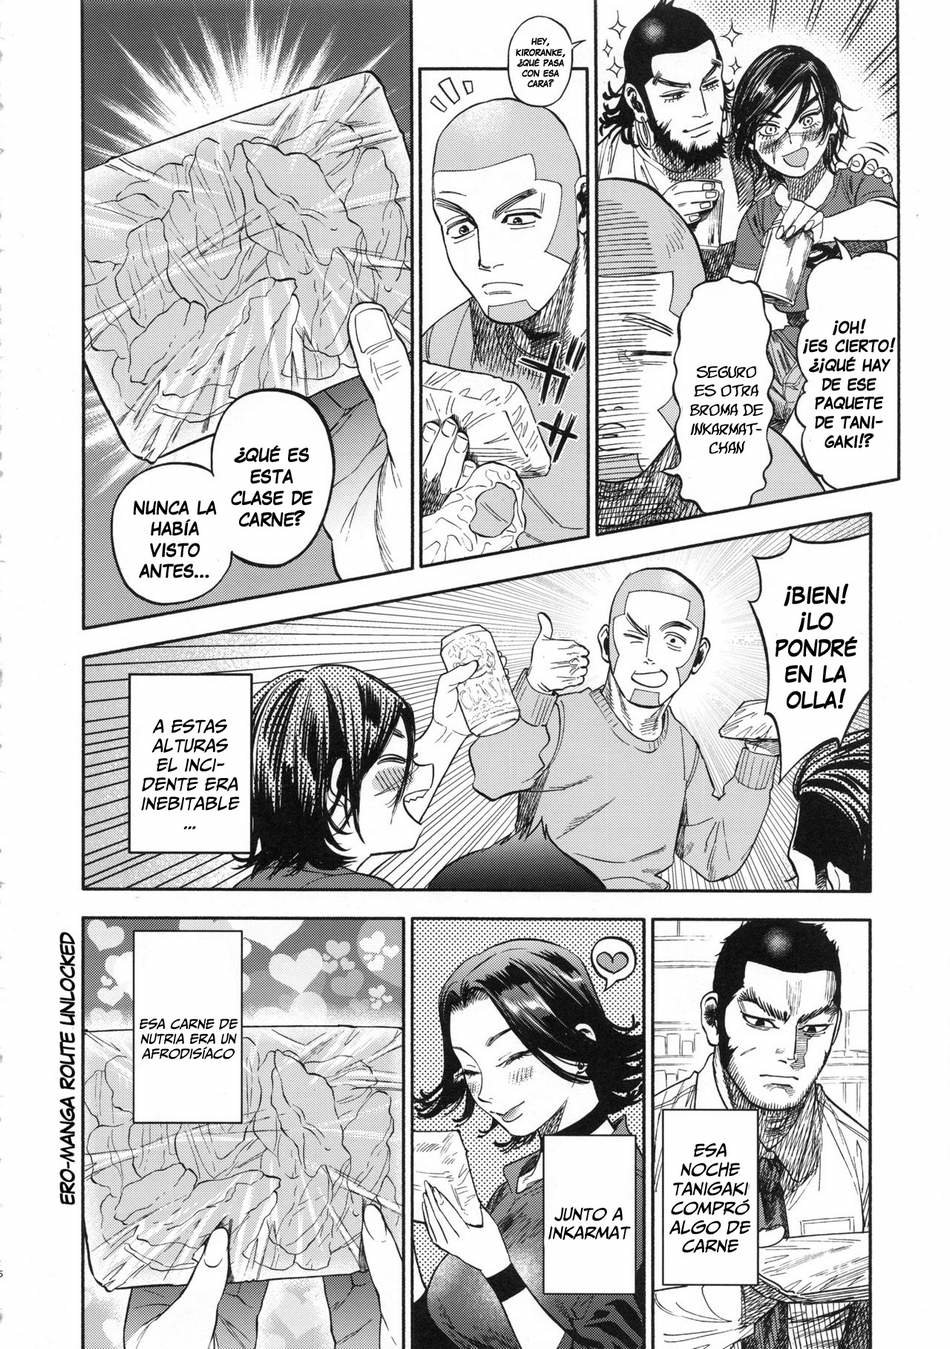 Lets Have Some Sea Otter Meat With Sugimoto-san (Golden Kamuy) - Nishida - 4